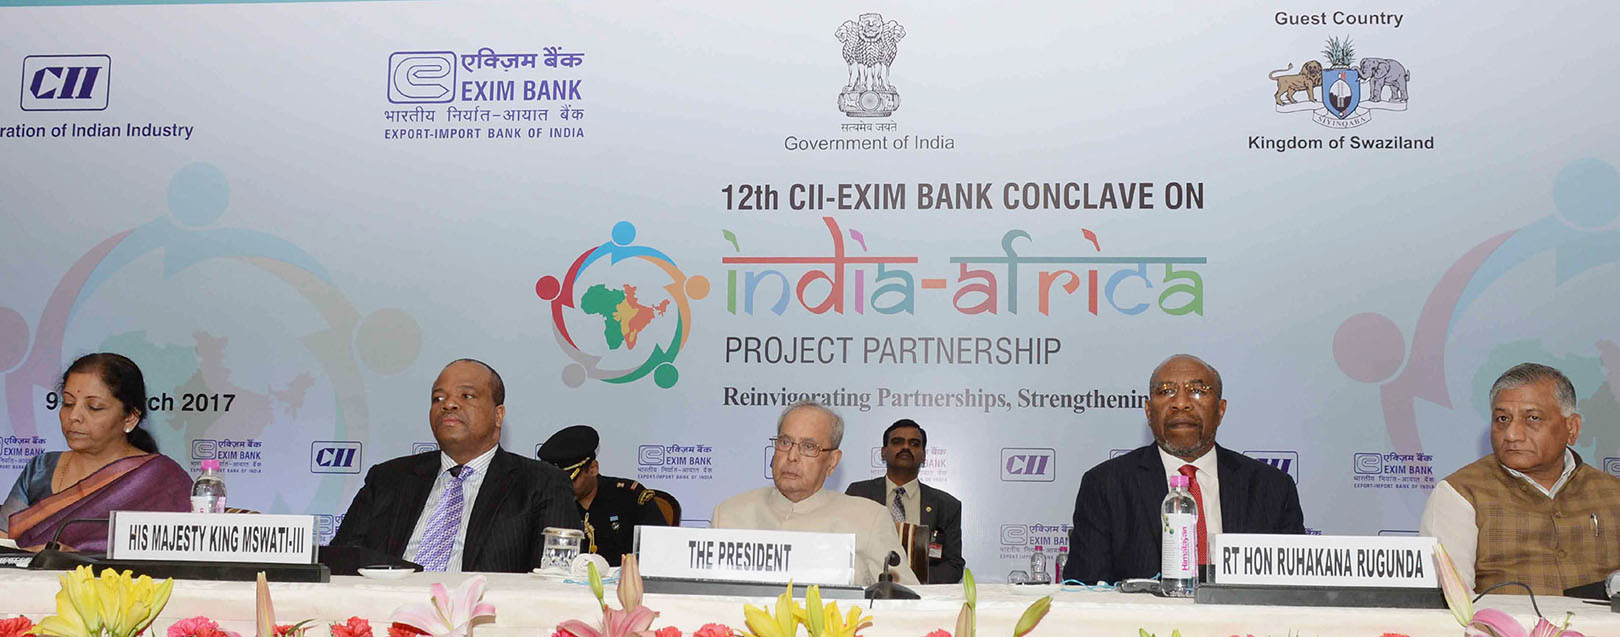 Combined GDP of India, Africa would be $35 tn by 2050: President